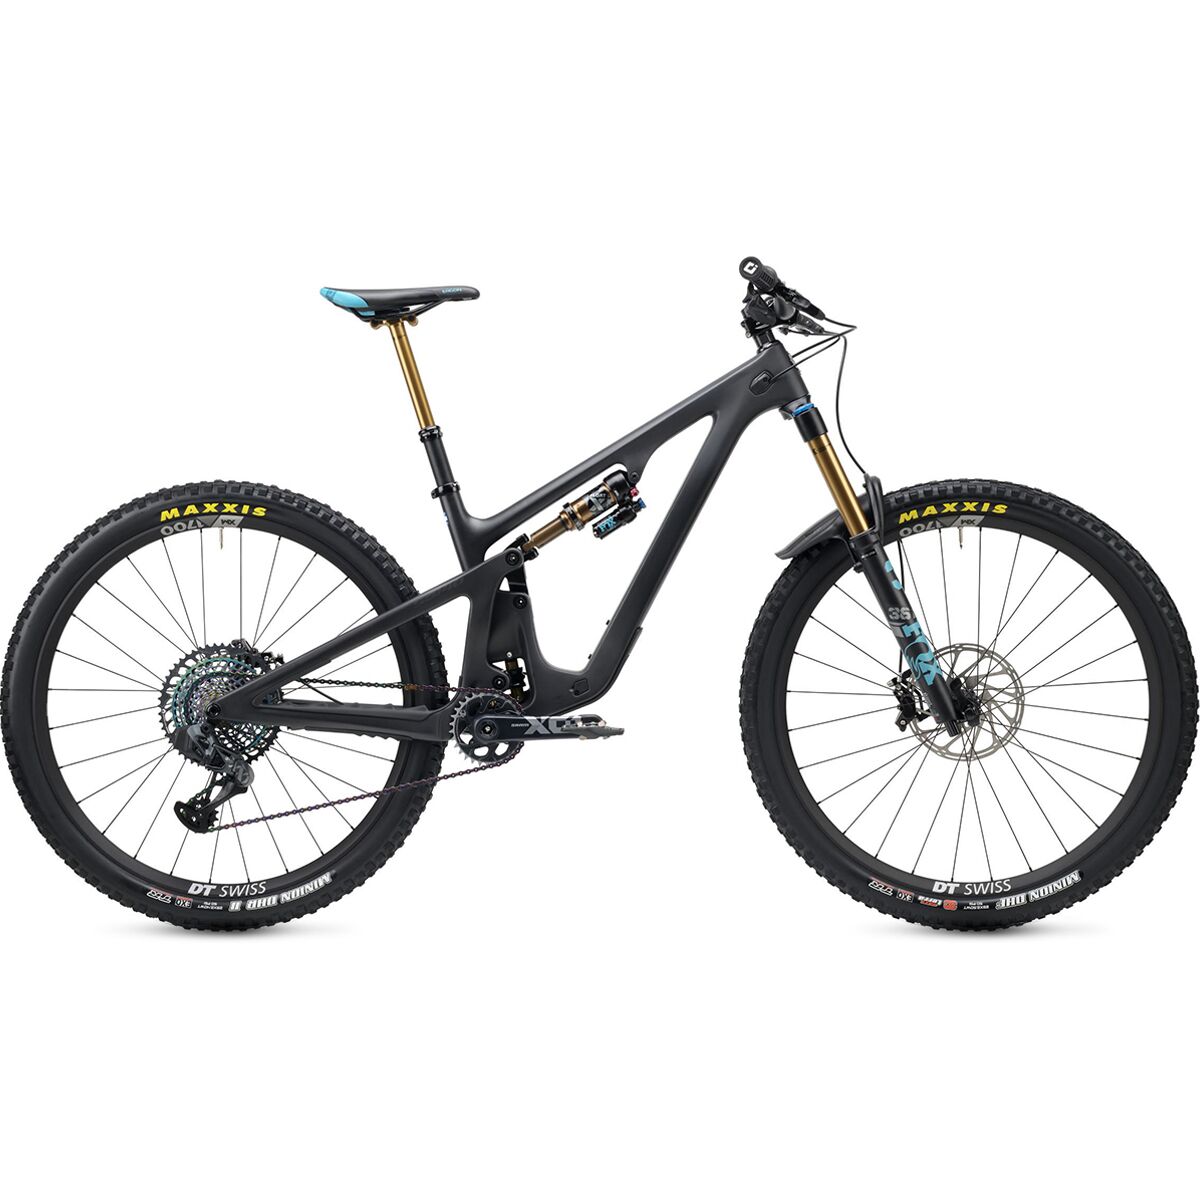 SB140 T4 TLR XX1 Eagle AXS 29in Mountain Bike